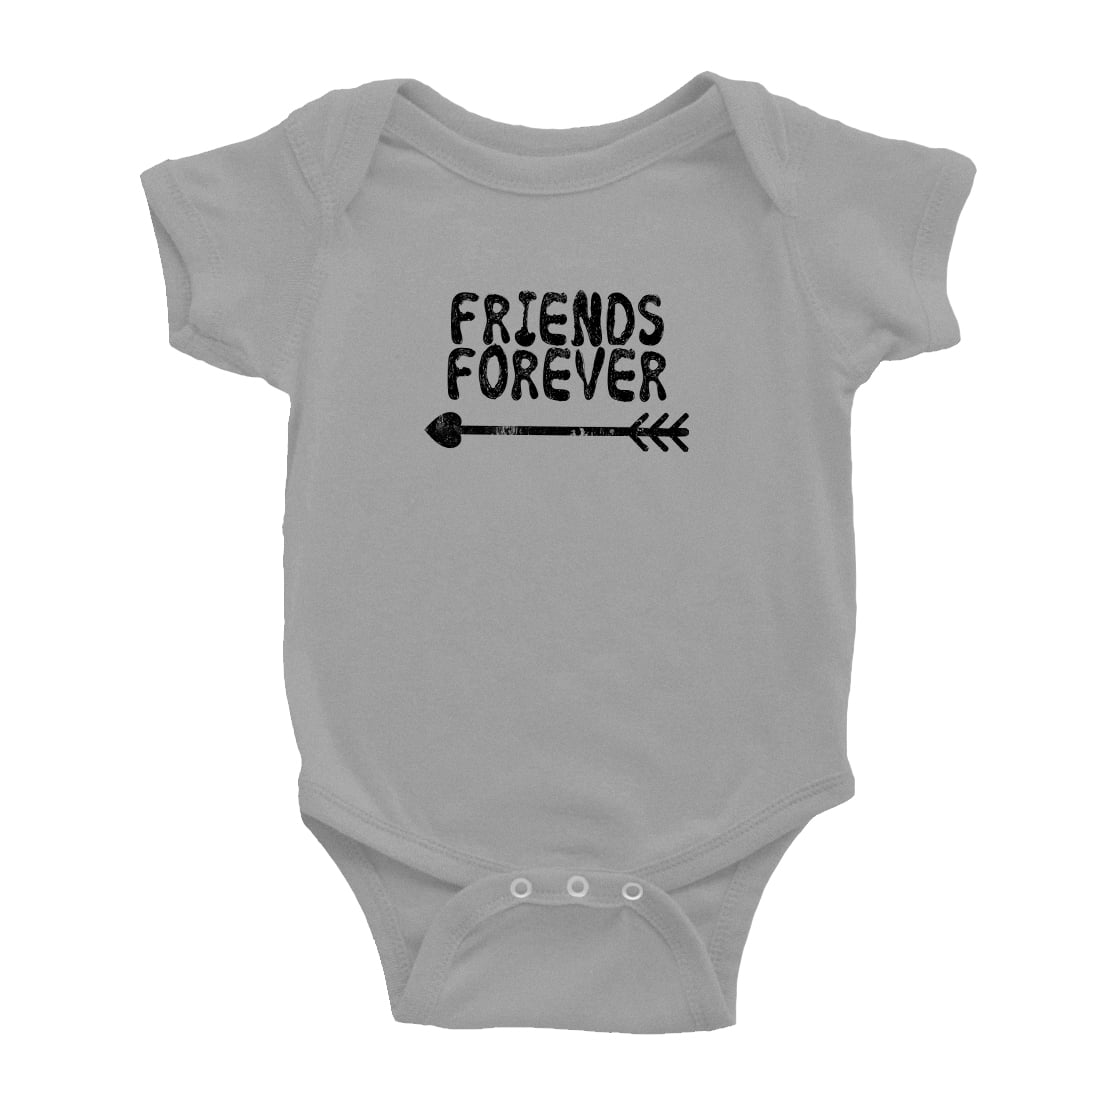 Baby Twins Bodysuit Outfit Born Together Friends Forever Cute